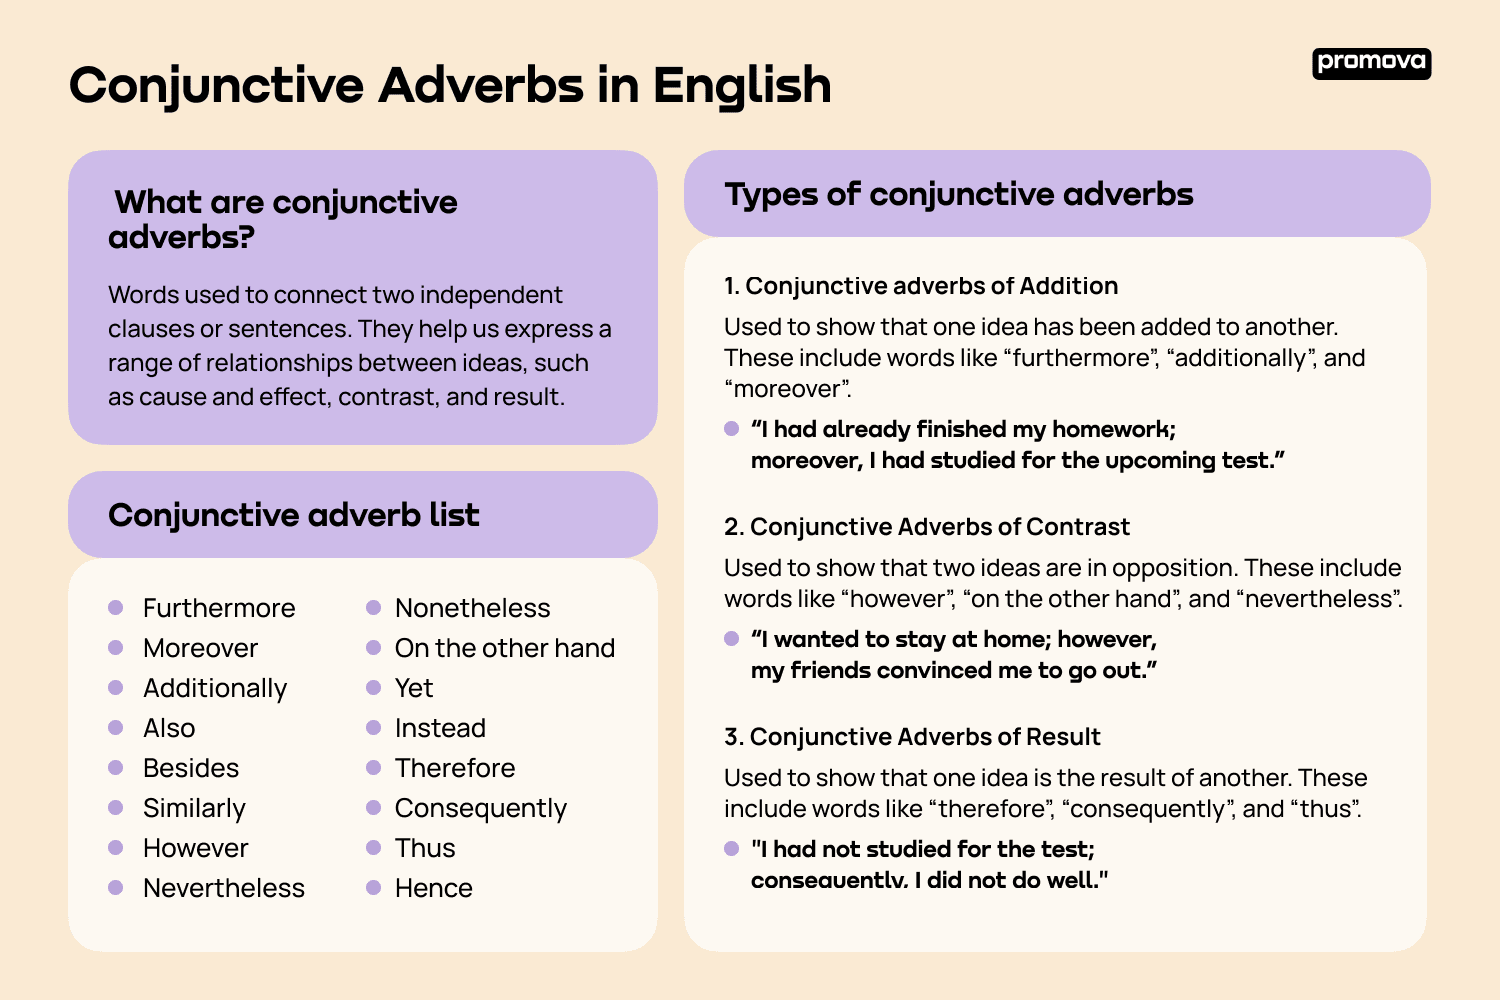 Types of conjunctive adverbs